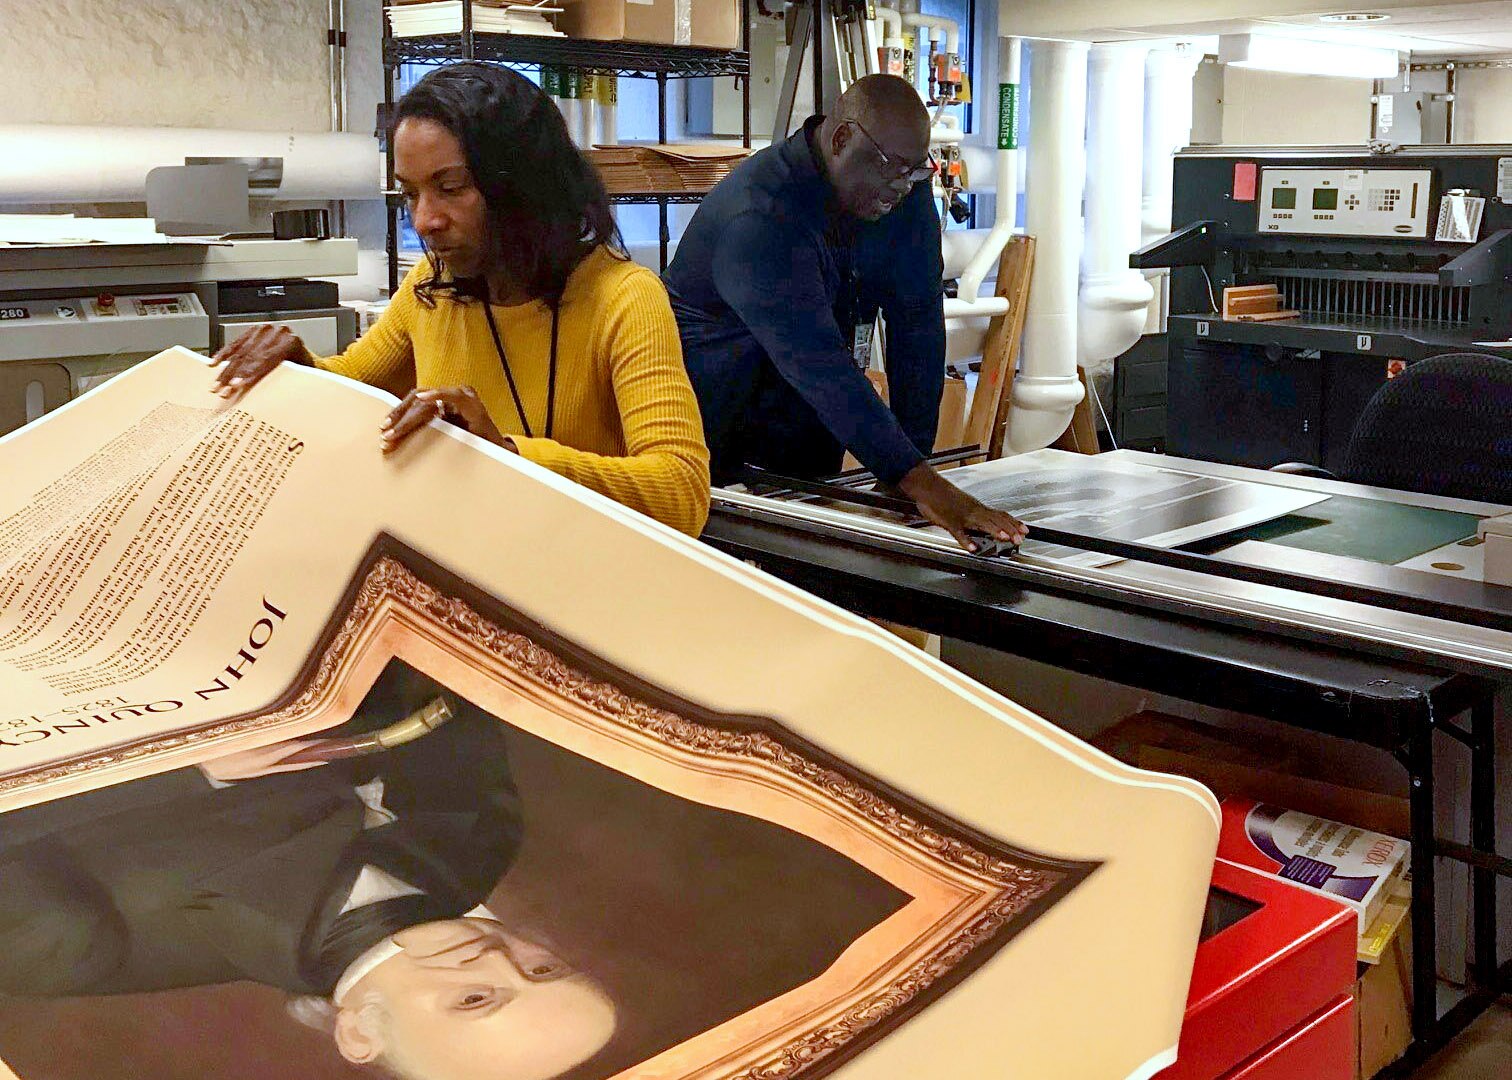 A woman looks at a large poster of a past president while the man behind her operates another print machine.